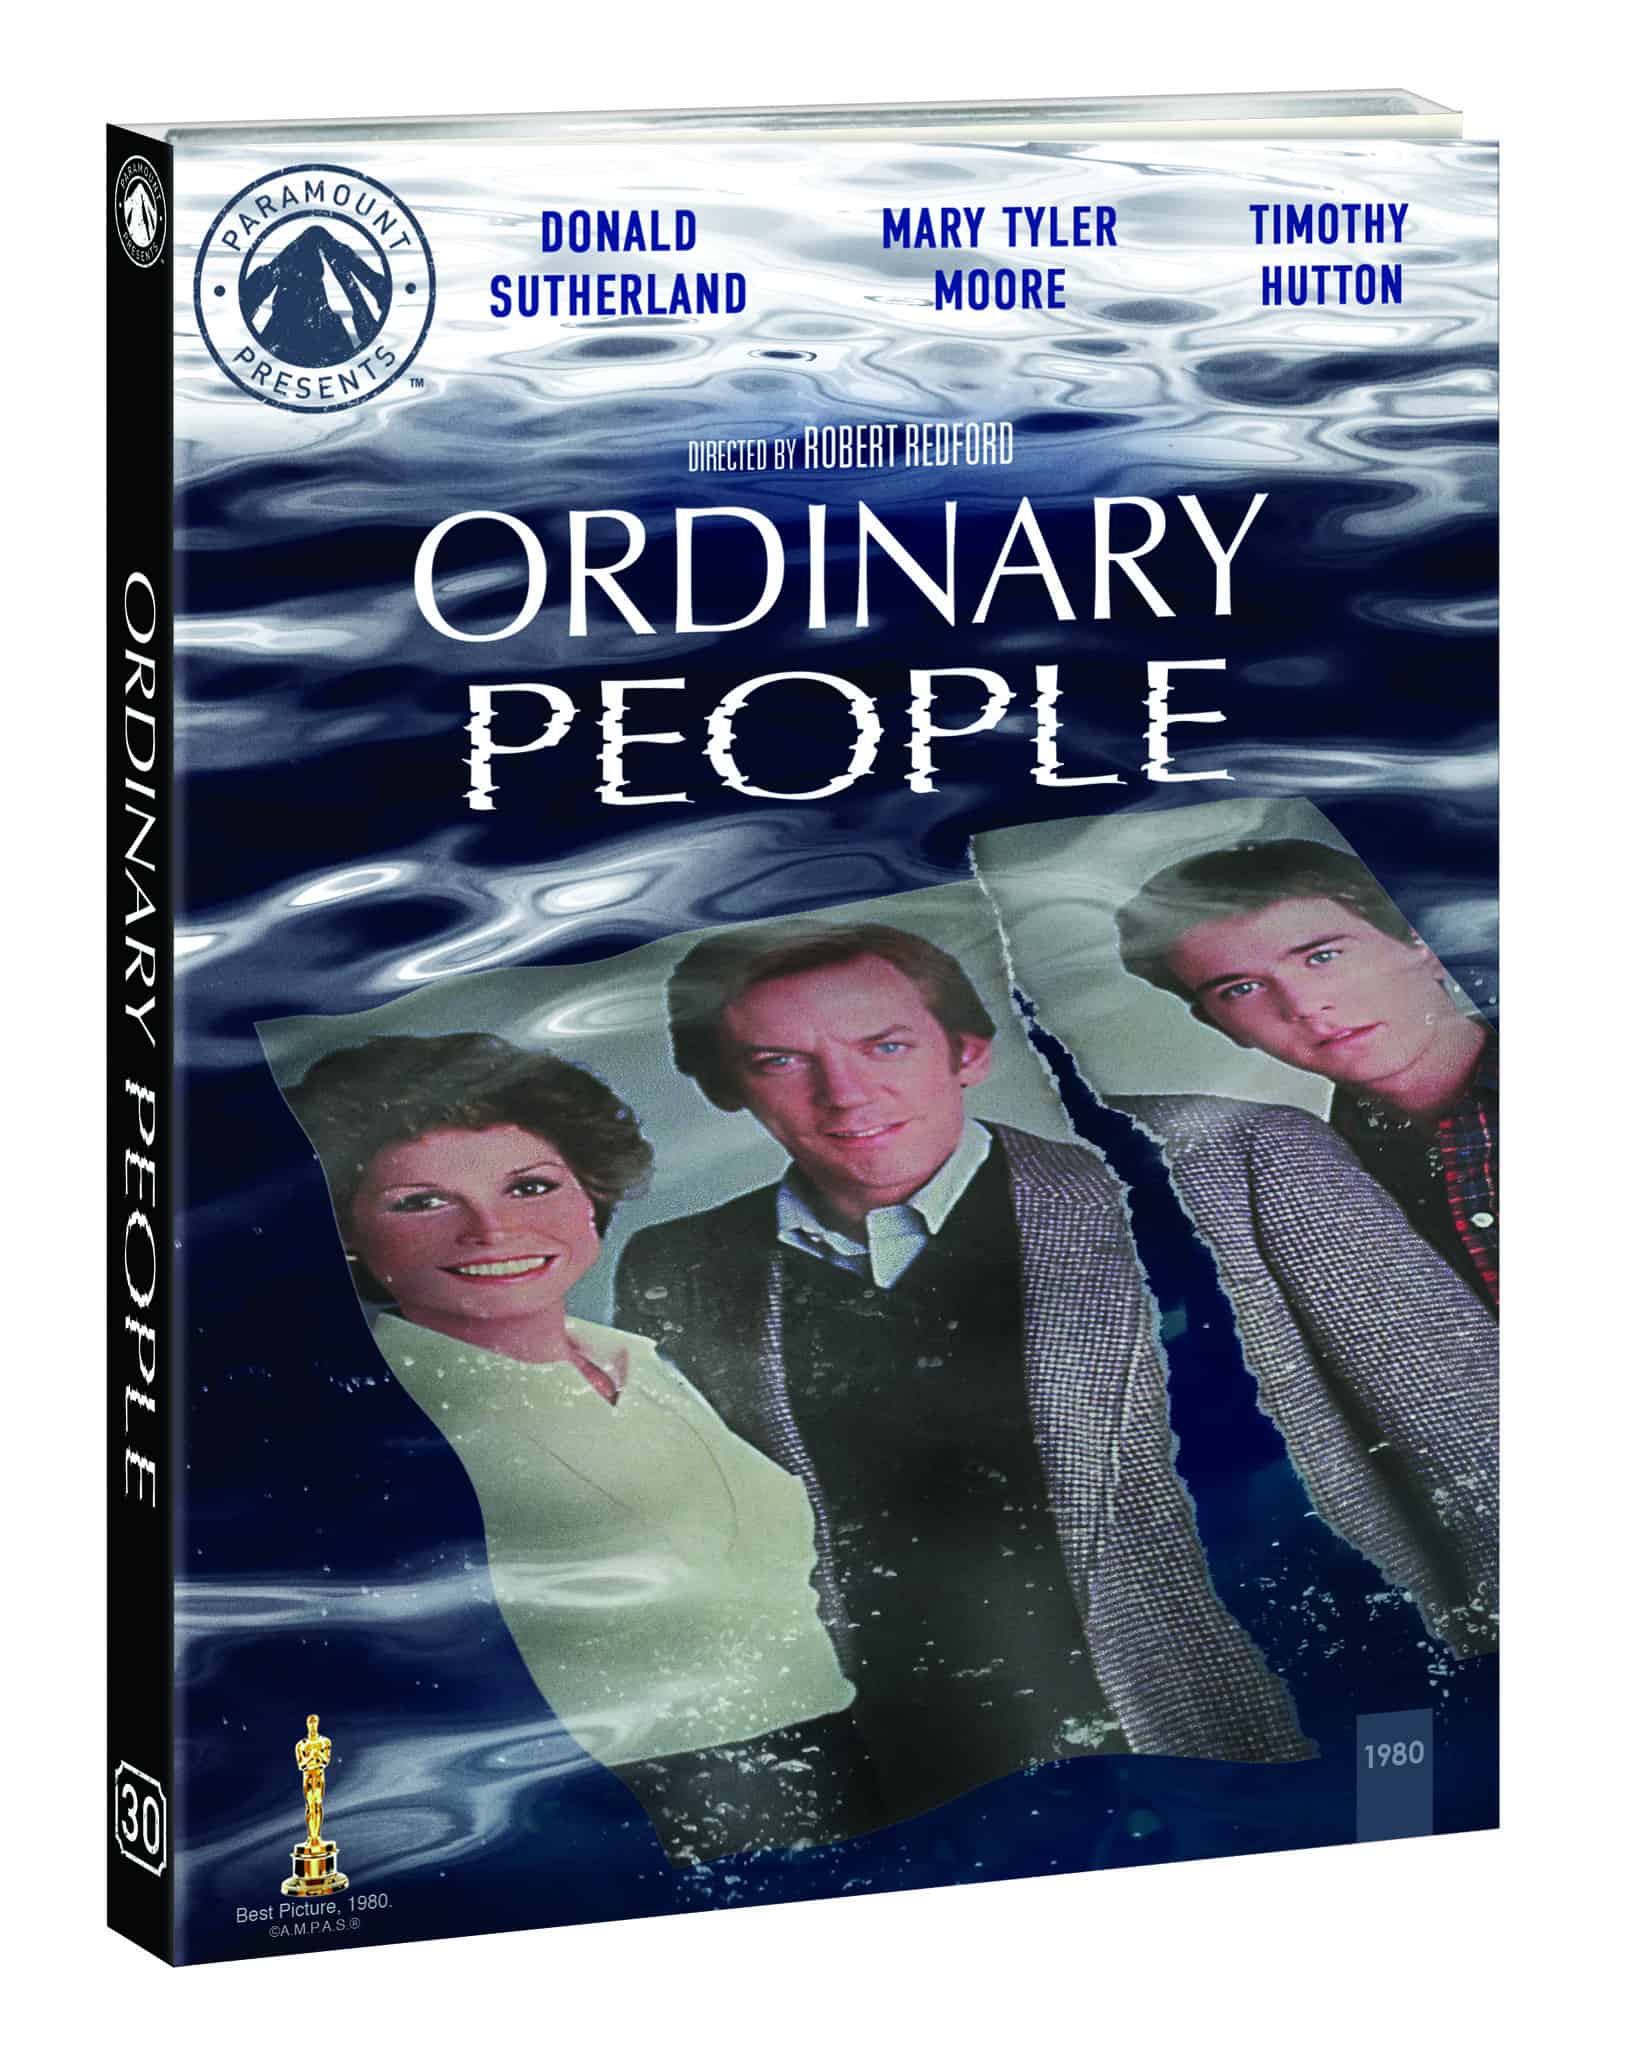 Ordinary People comes to Blu-ray on March 29th 2